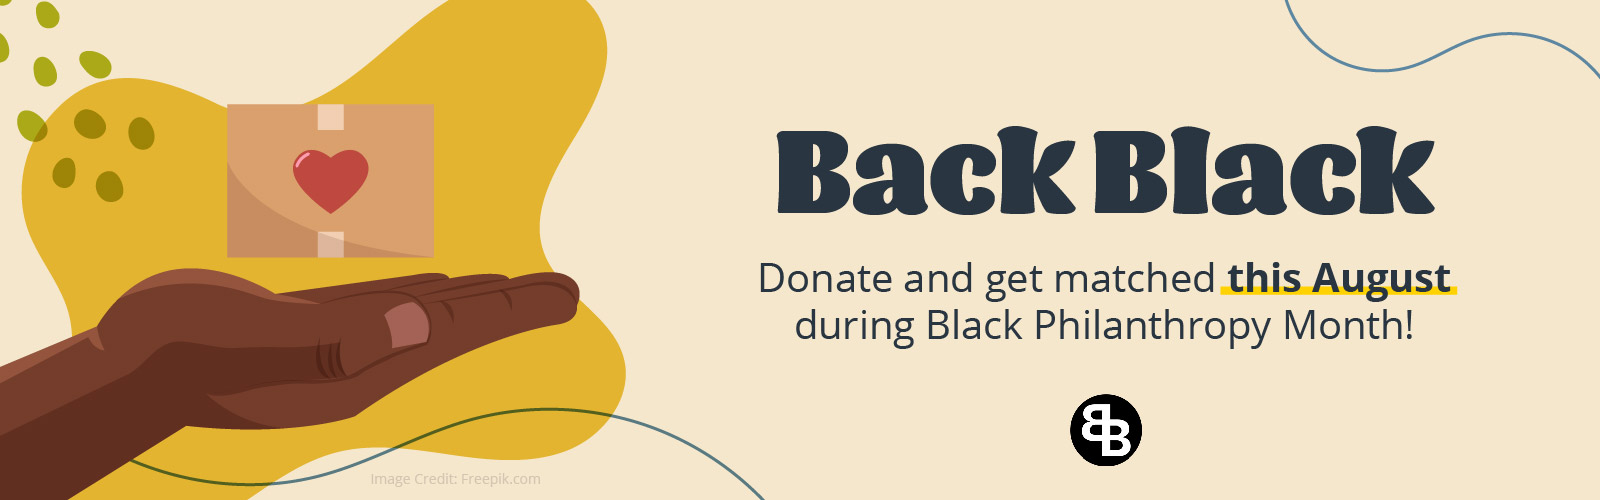 BackBlack Donate and get matched this August during Black Philanthropy Month